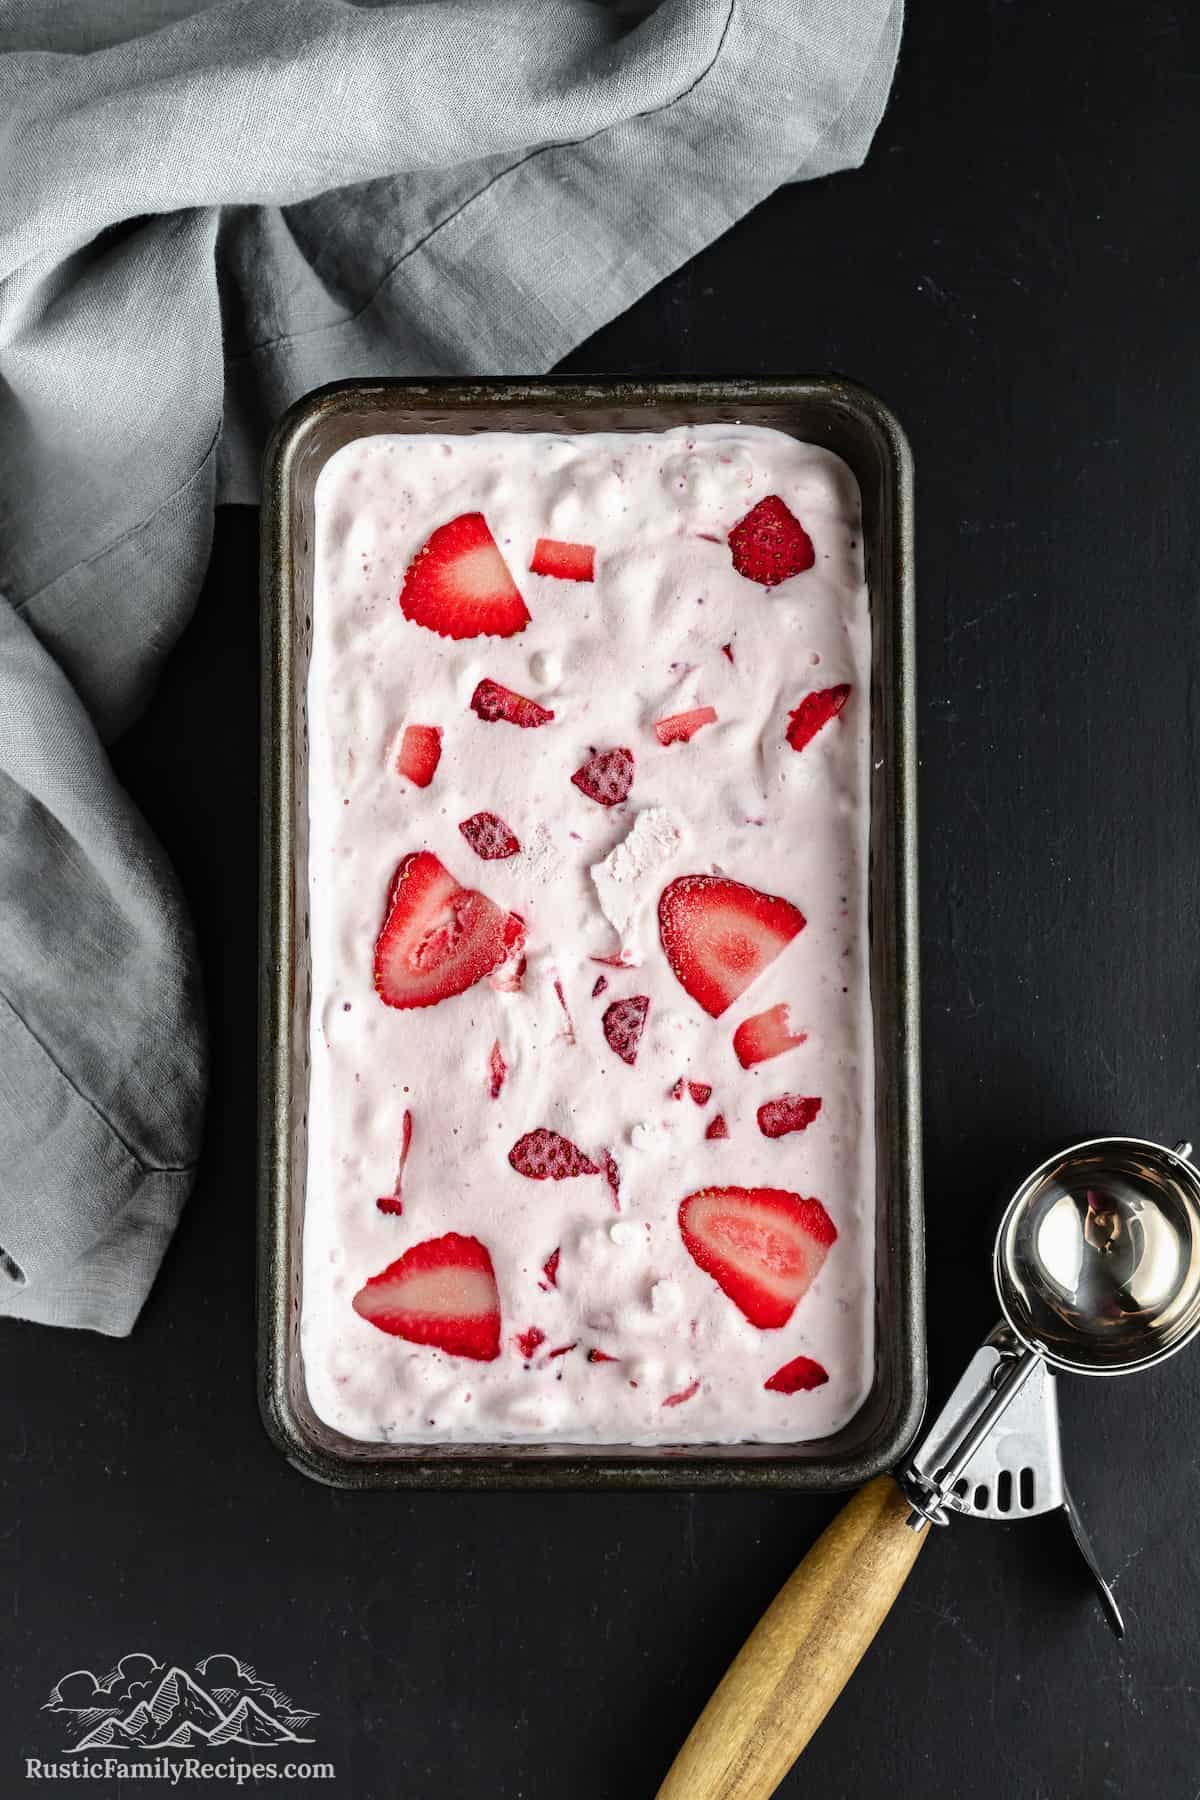 Top view of a pan filled with homemade strawberry ice cream, next to an ice cream scoop.